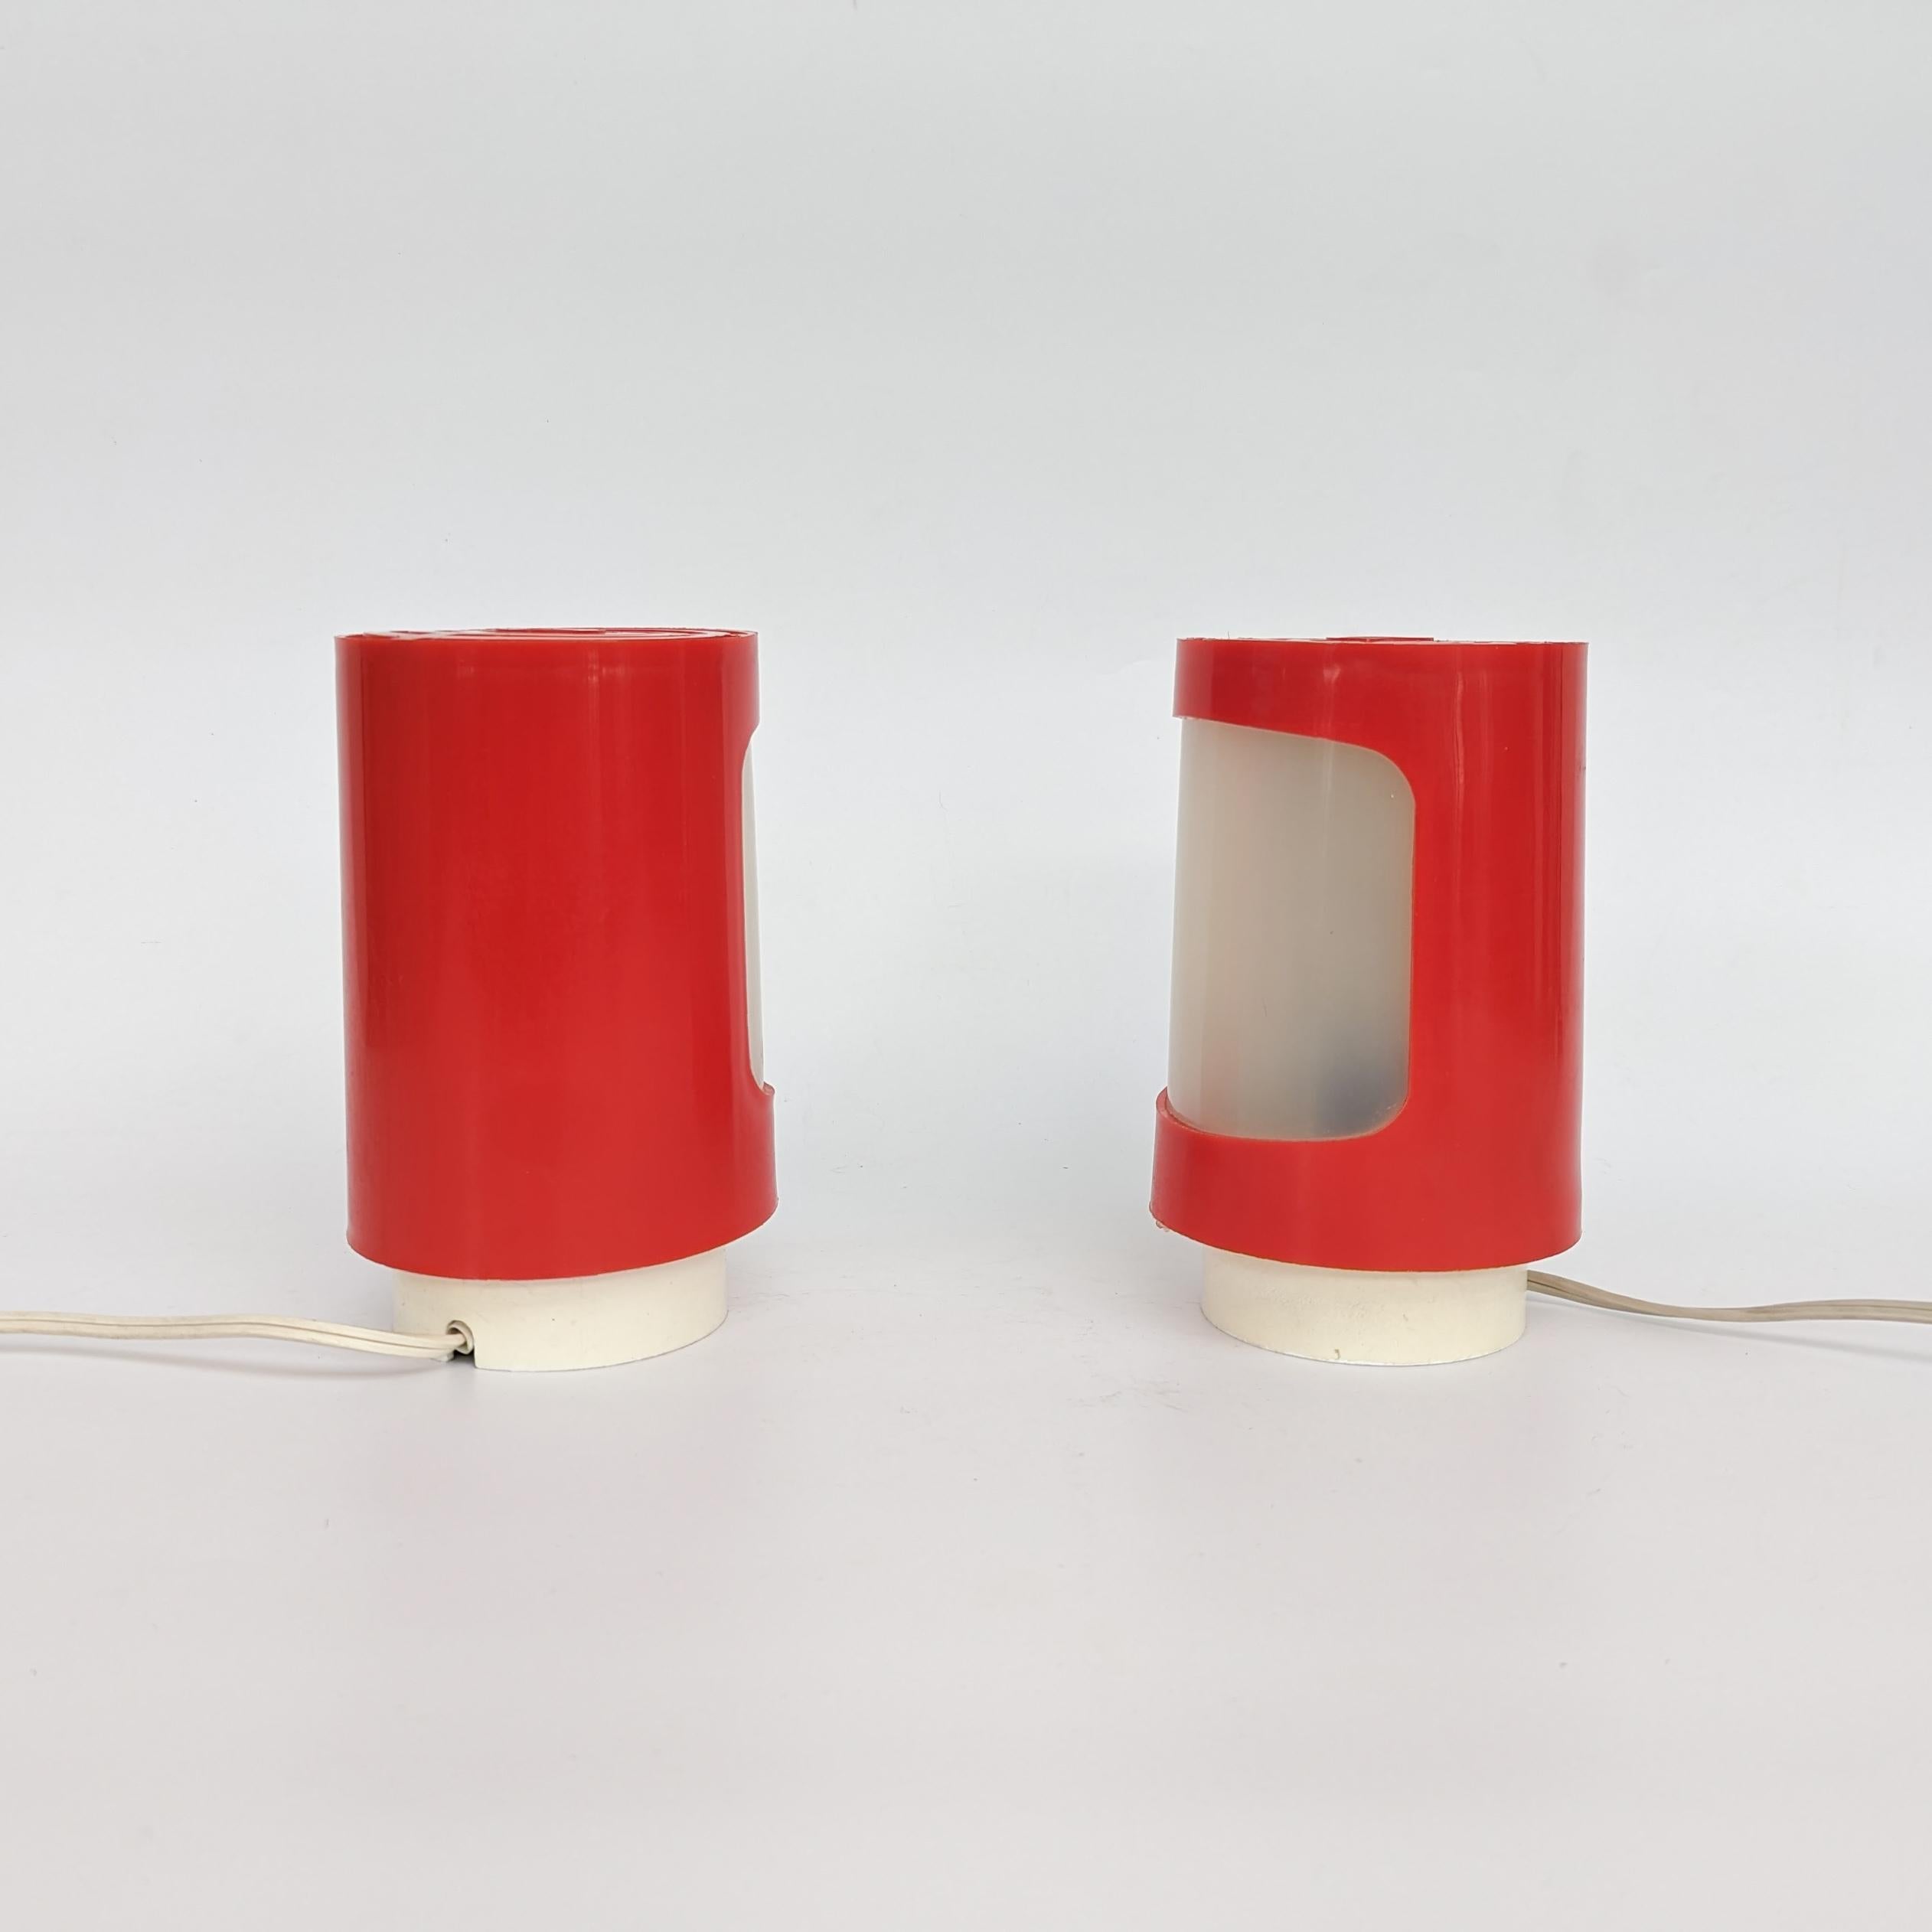 Czech Pair of space age red plastic table lamps by Elektrosvit, 1960s